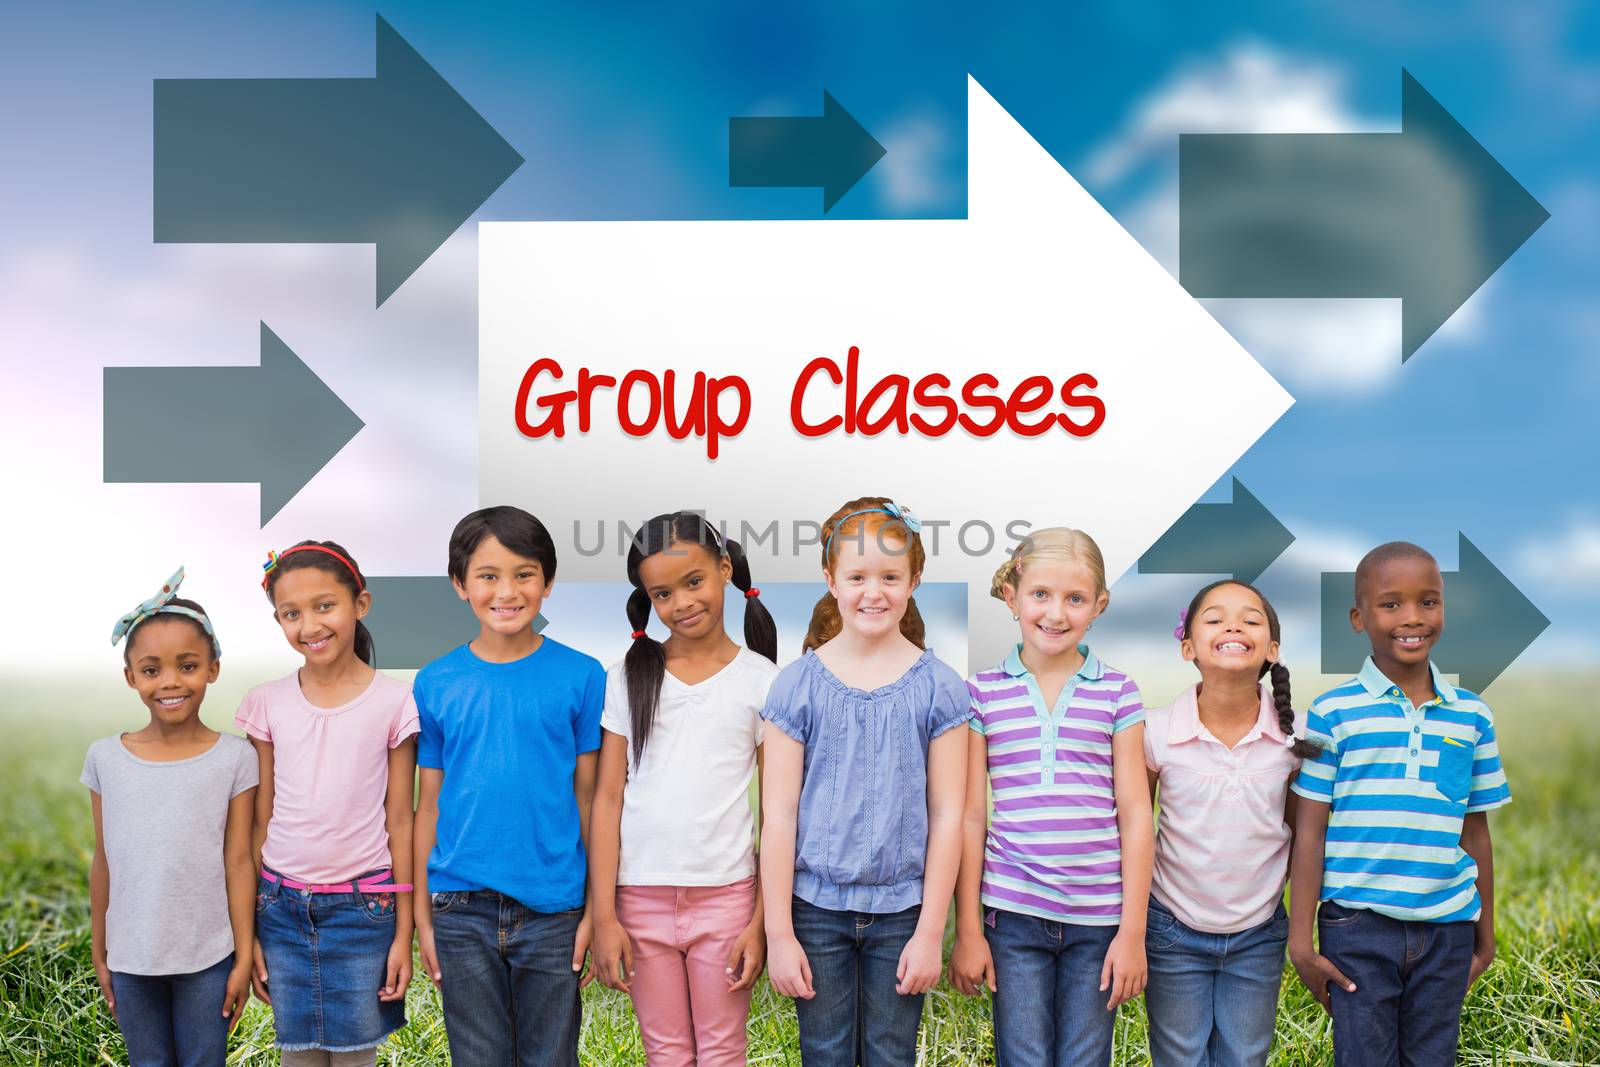 The word group classes and cute pupils smiling at camera in classroom against sunny landscape